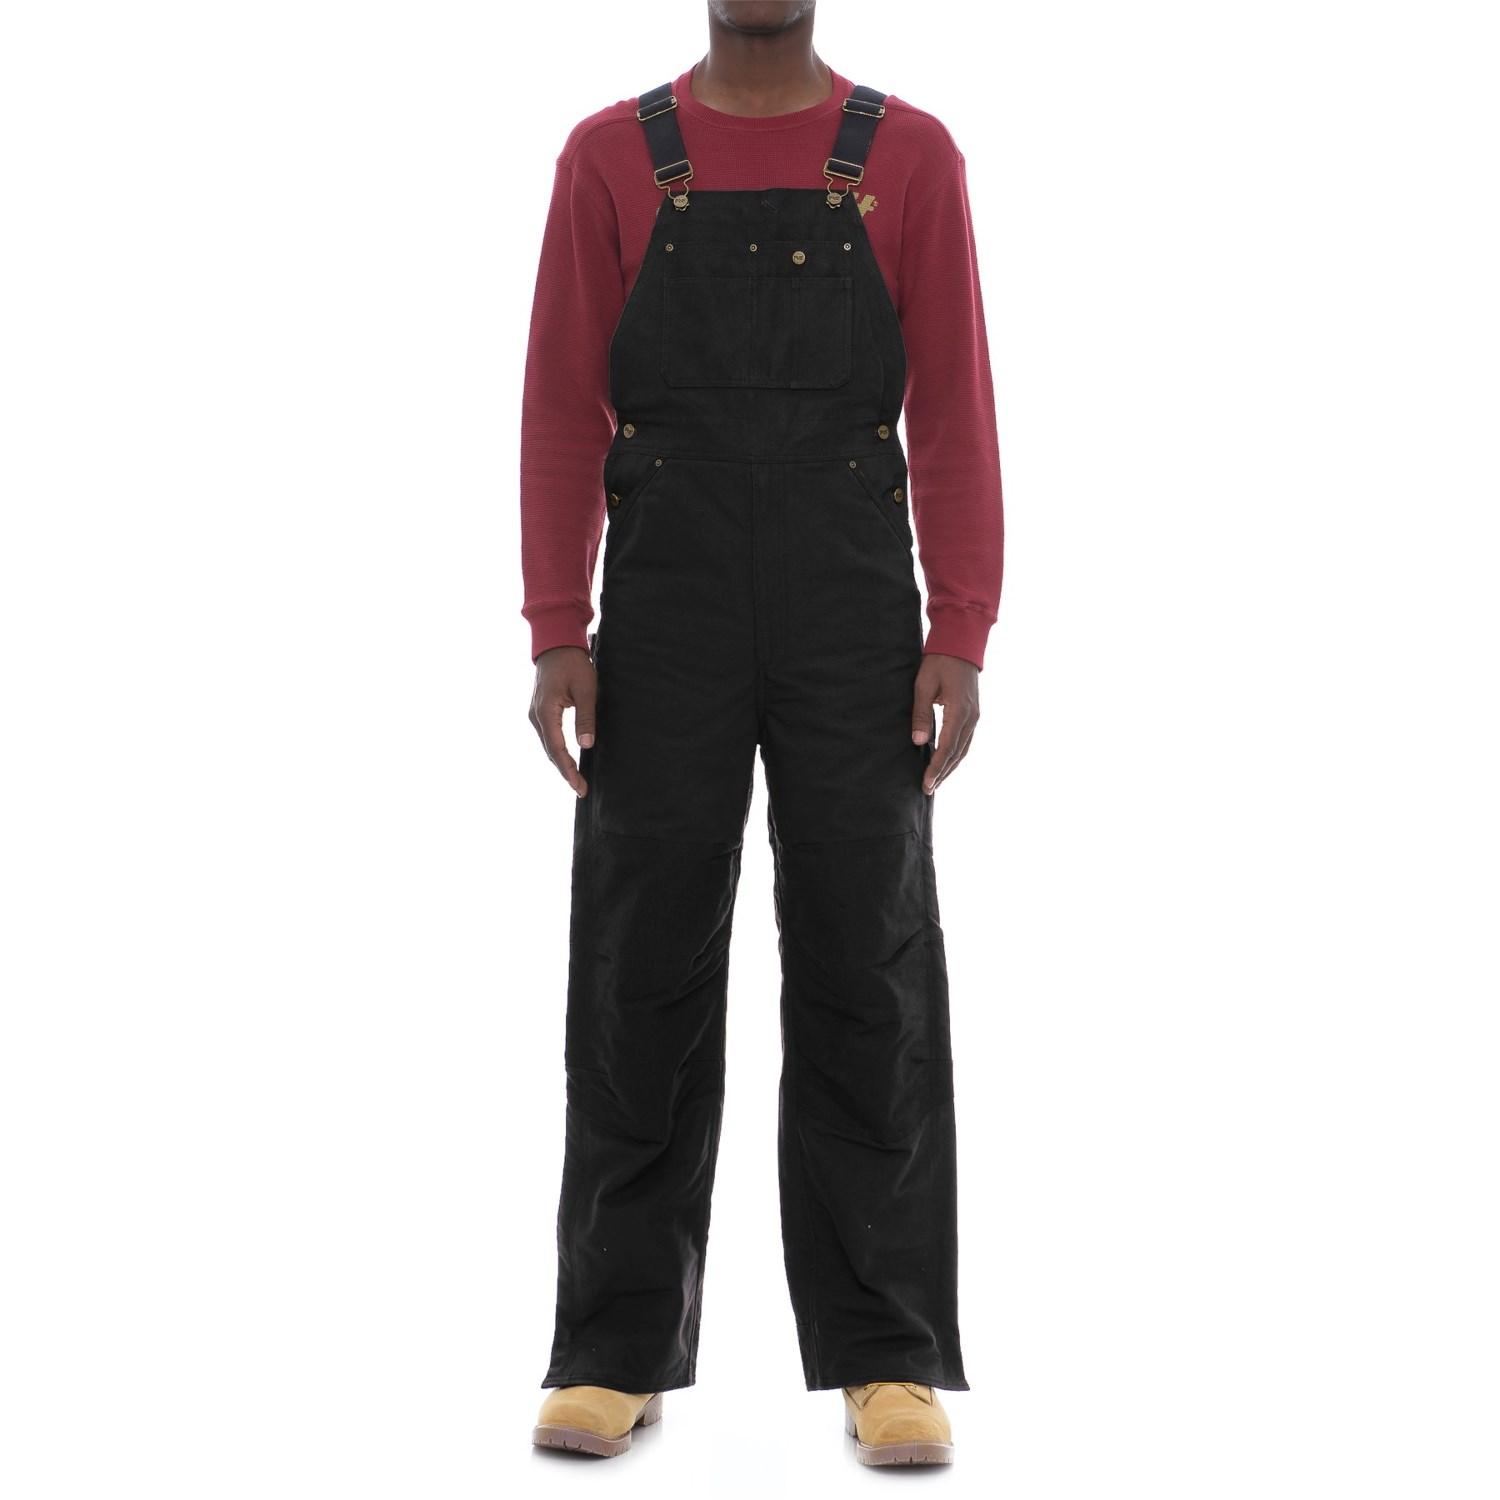 Timberland Synthetic Gut Check Premium Bib Overalls in Black for Men - Lyst